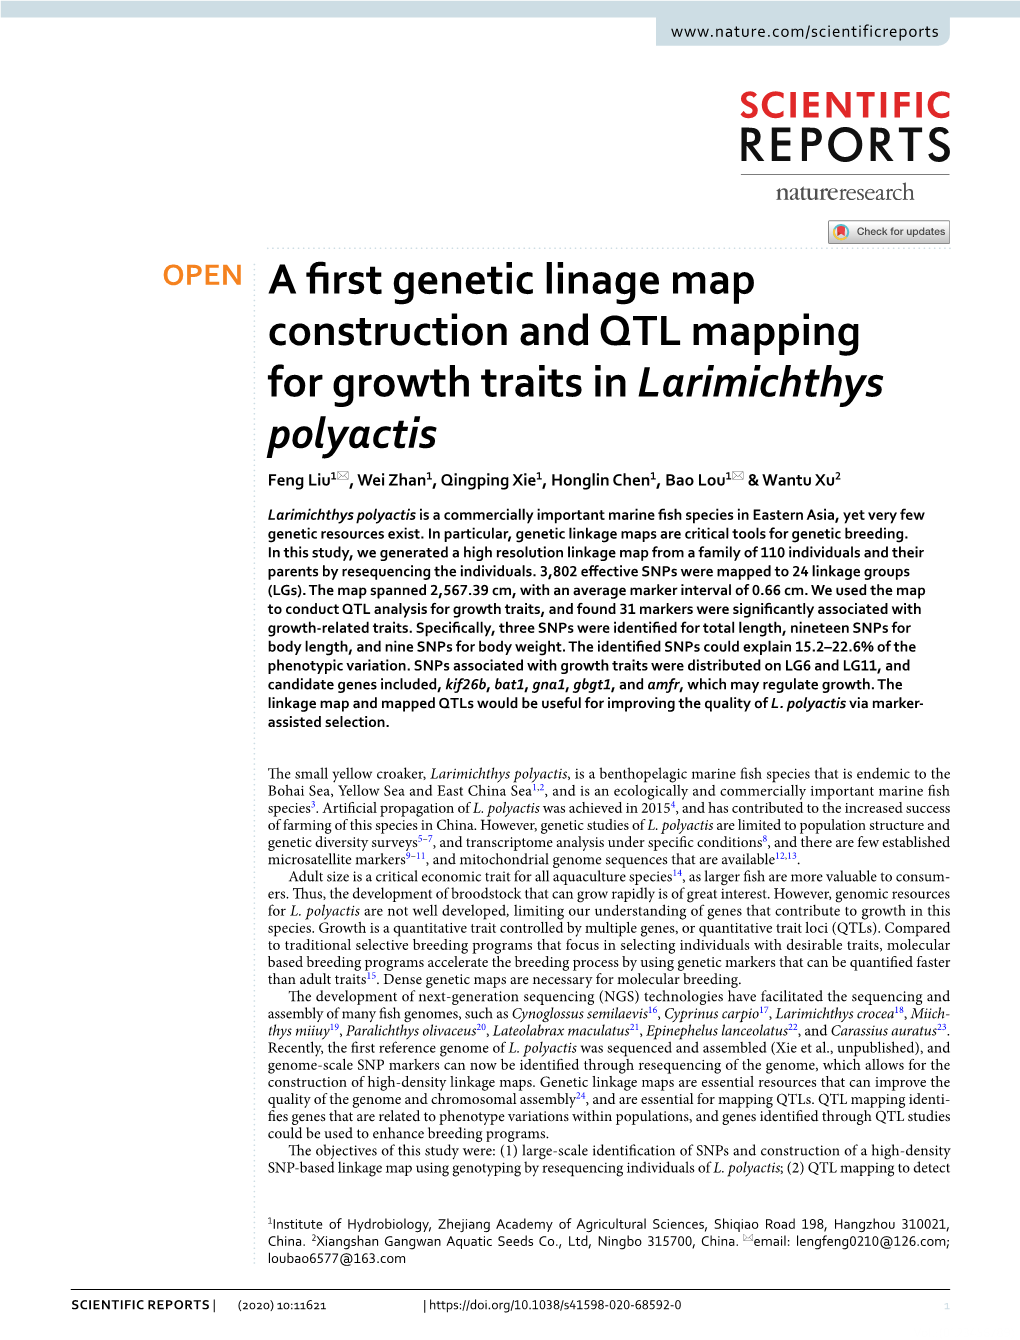 A First Genetic Linage Map Construction and QTL Mapping for Growth Traits